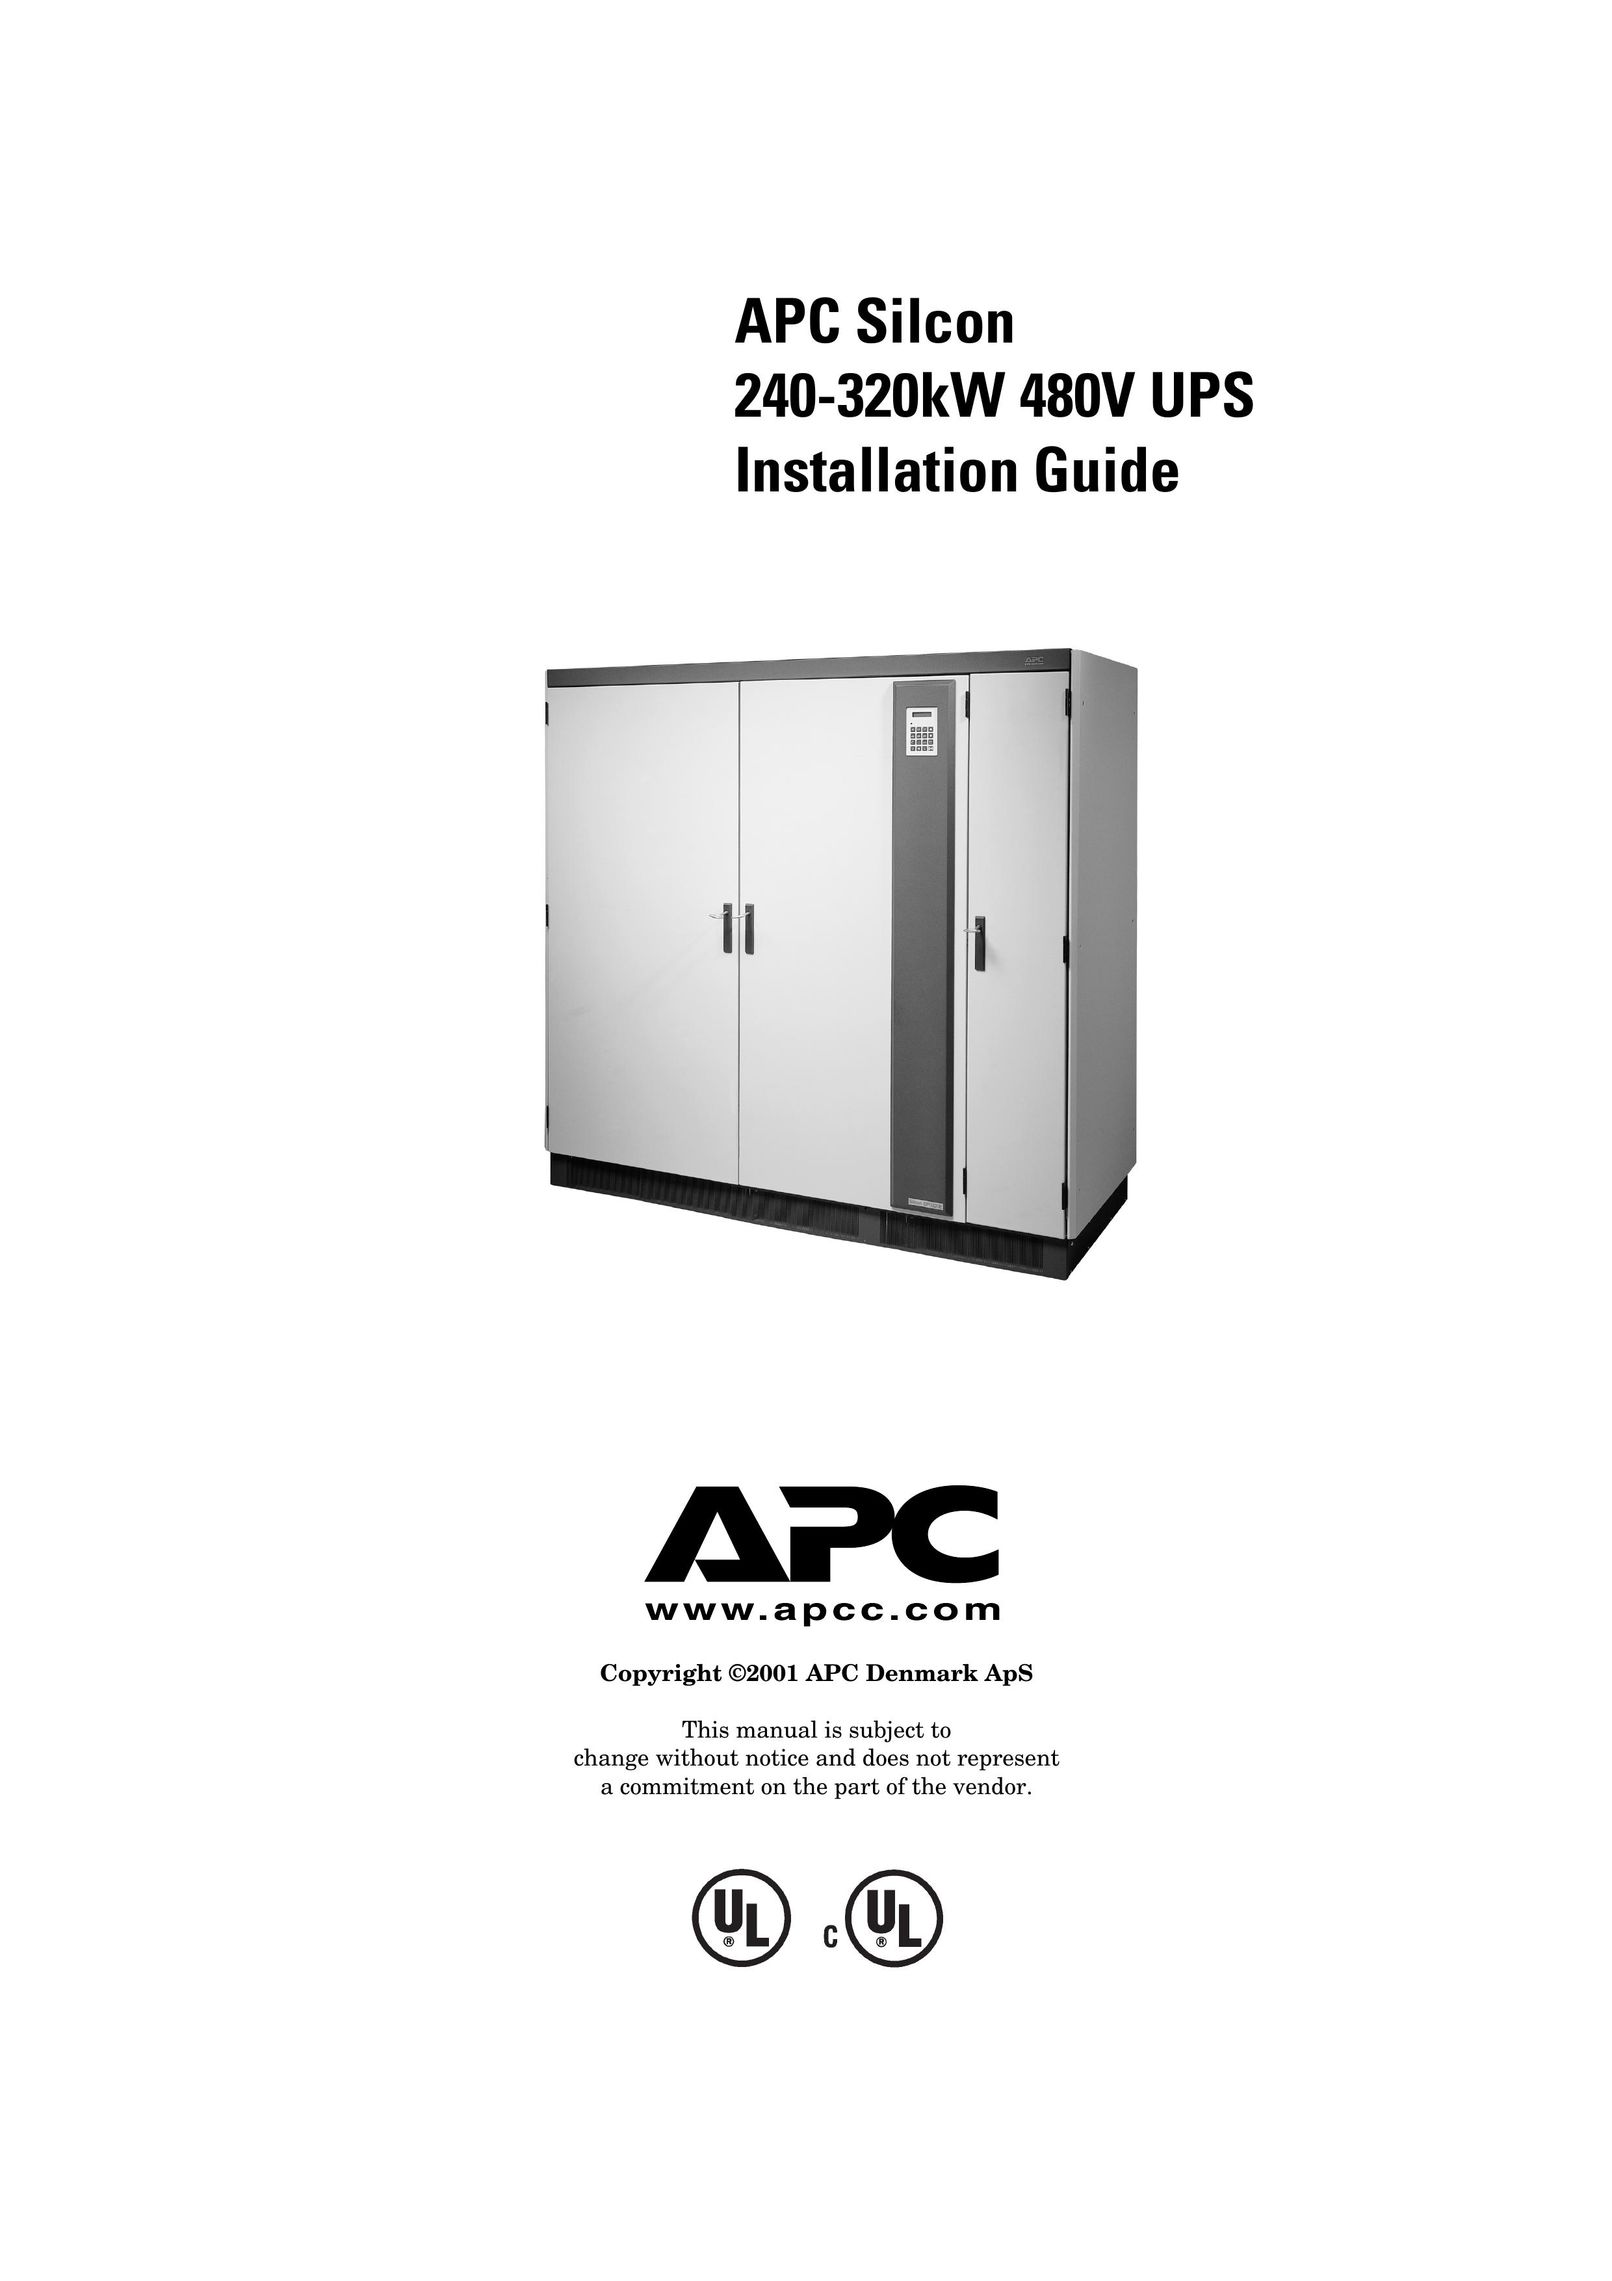 American Power Conversion 240-320kW Power Supply User Manual